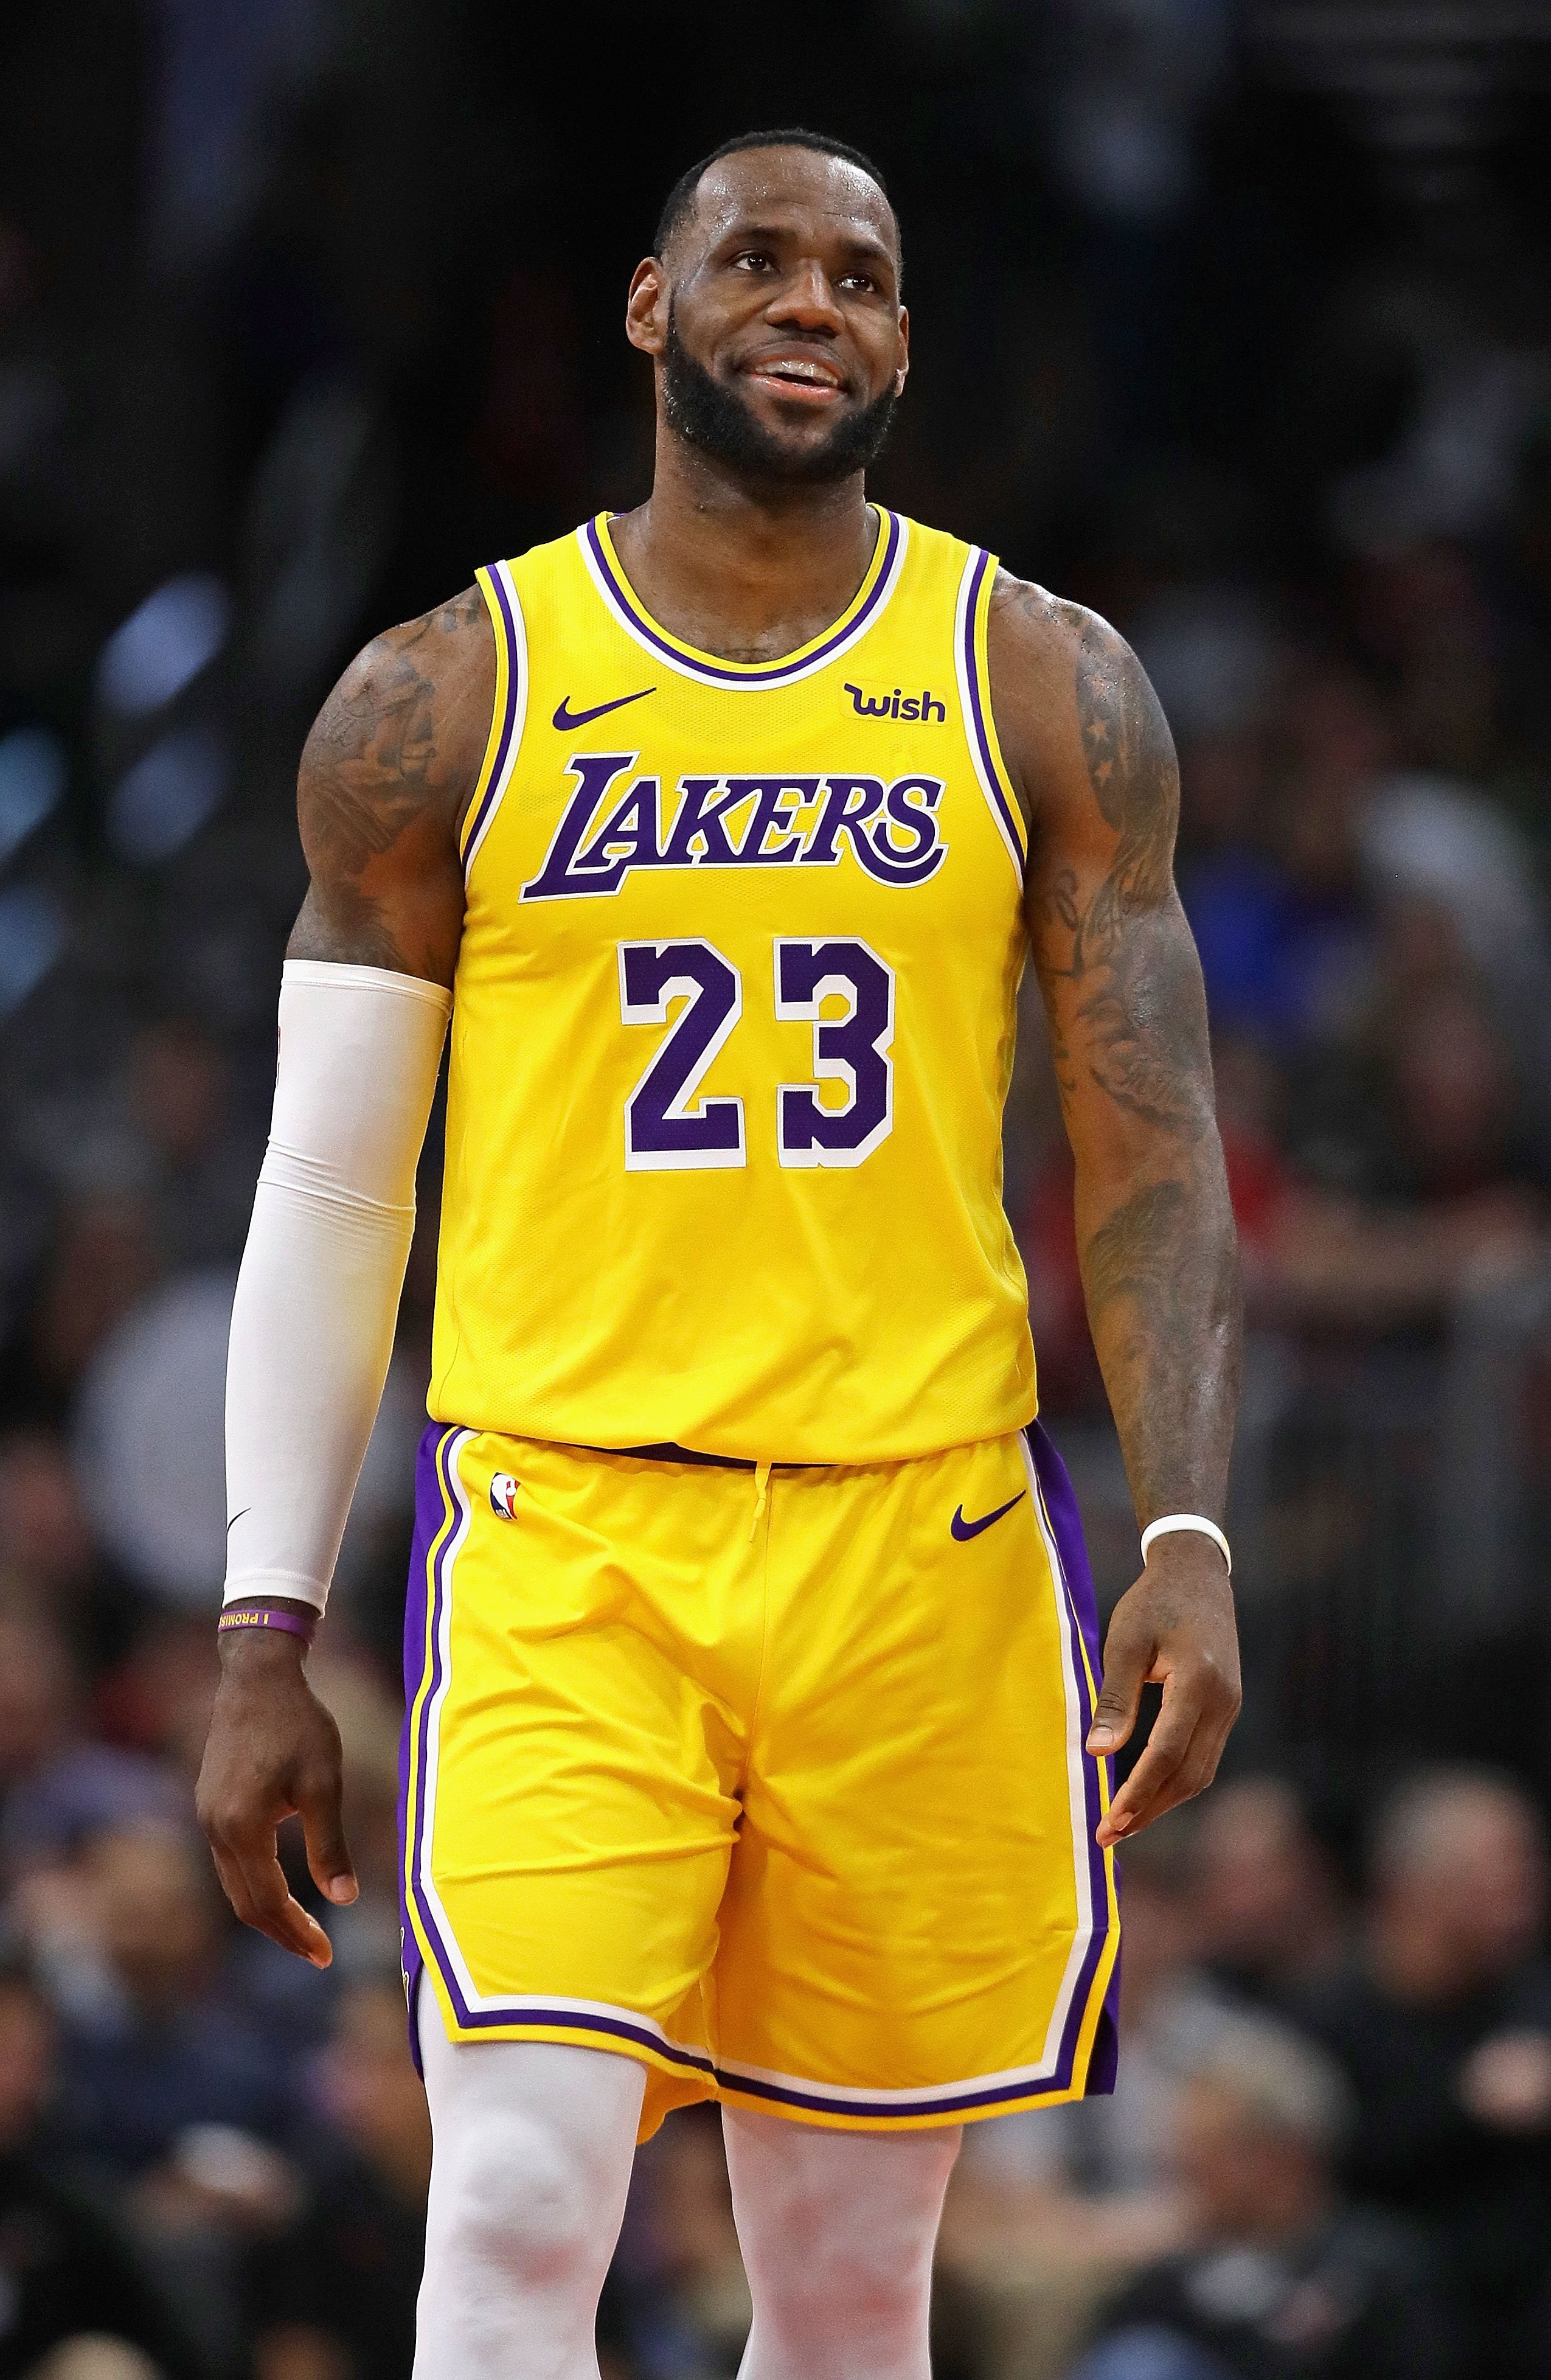 LeBron James #23 of the Los Angeles Lakers smiles after a play against the Chicago Bulls on March 12, 2019. | Photo: Getty Images.